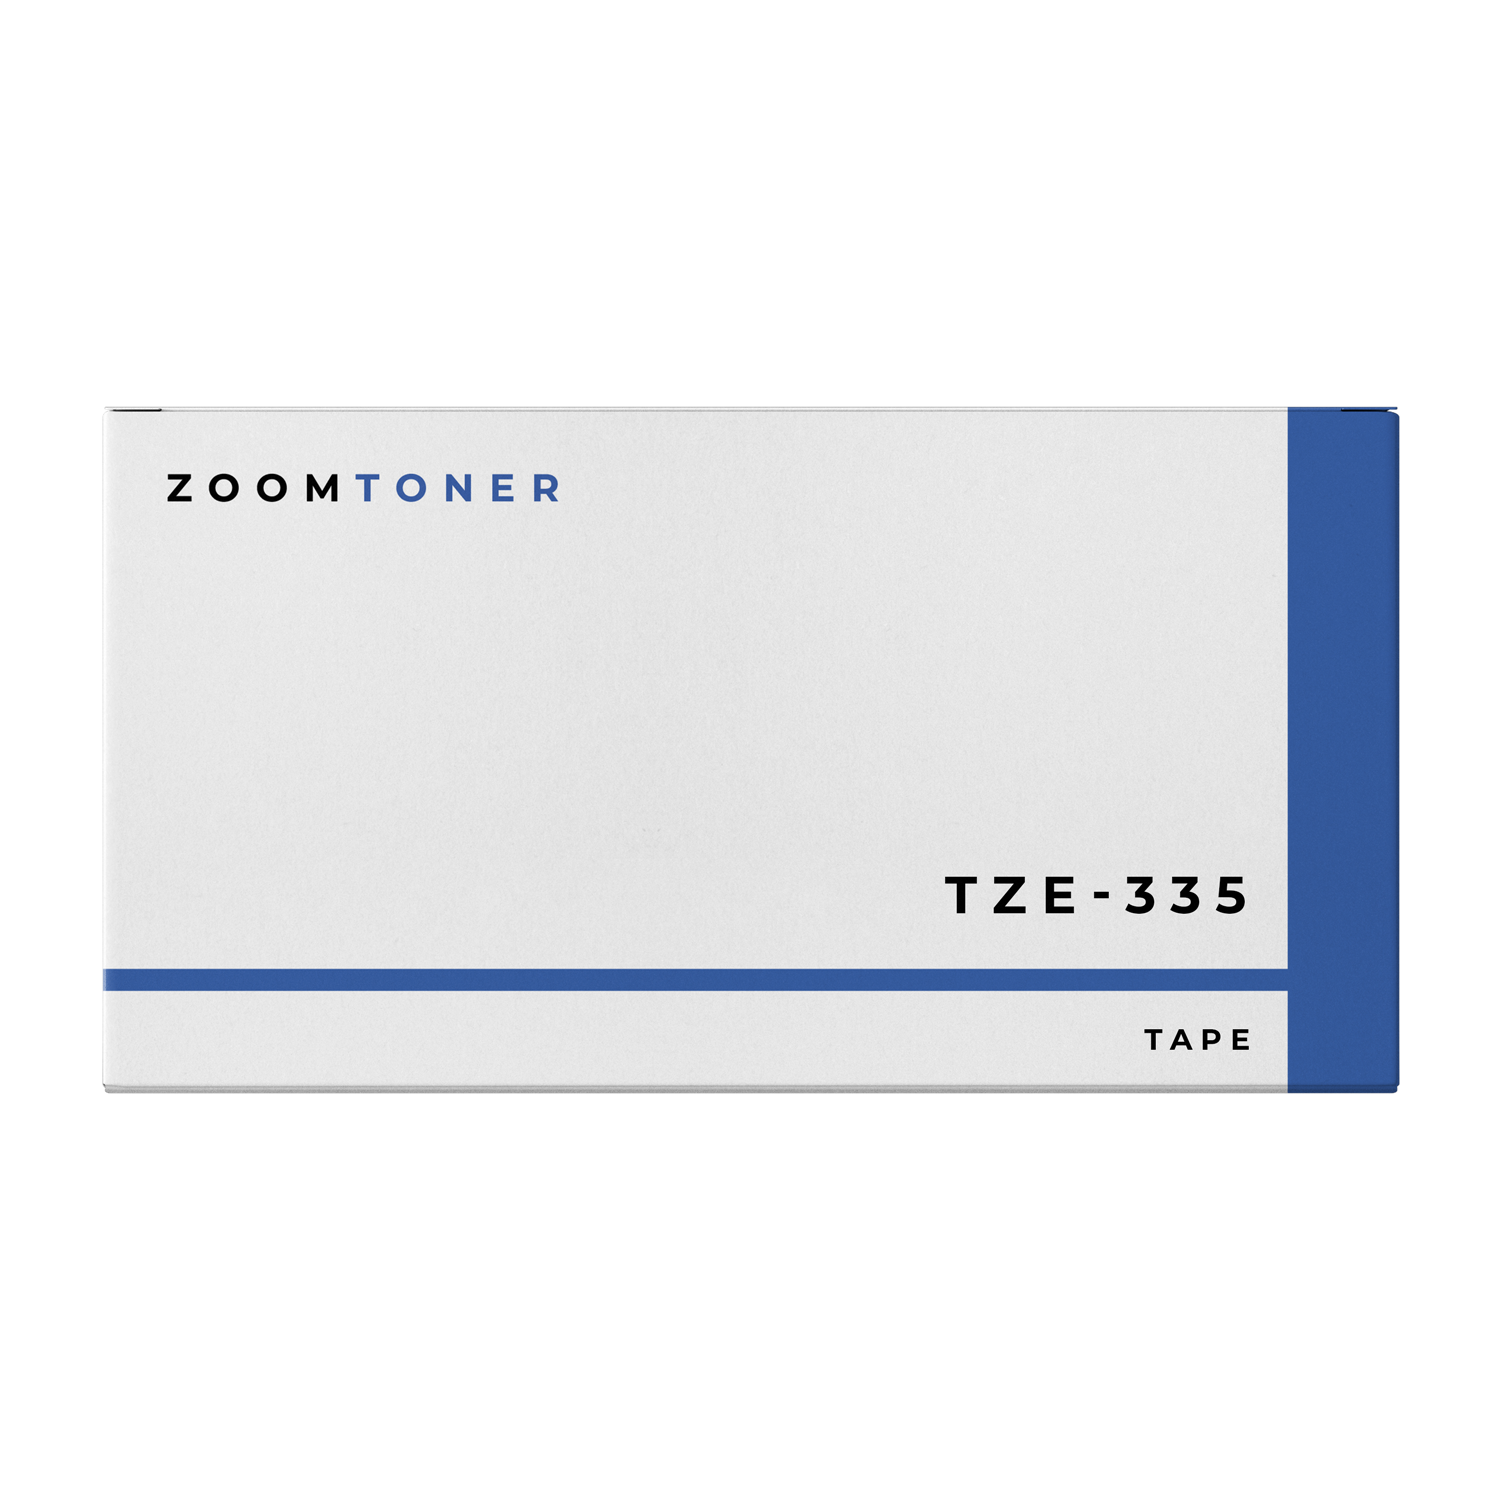 Brand New Original Brother TZE-335 - White on Black Laminated Tape for P-touch Label Makers - 12 mm wide x 8 m long